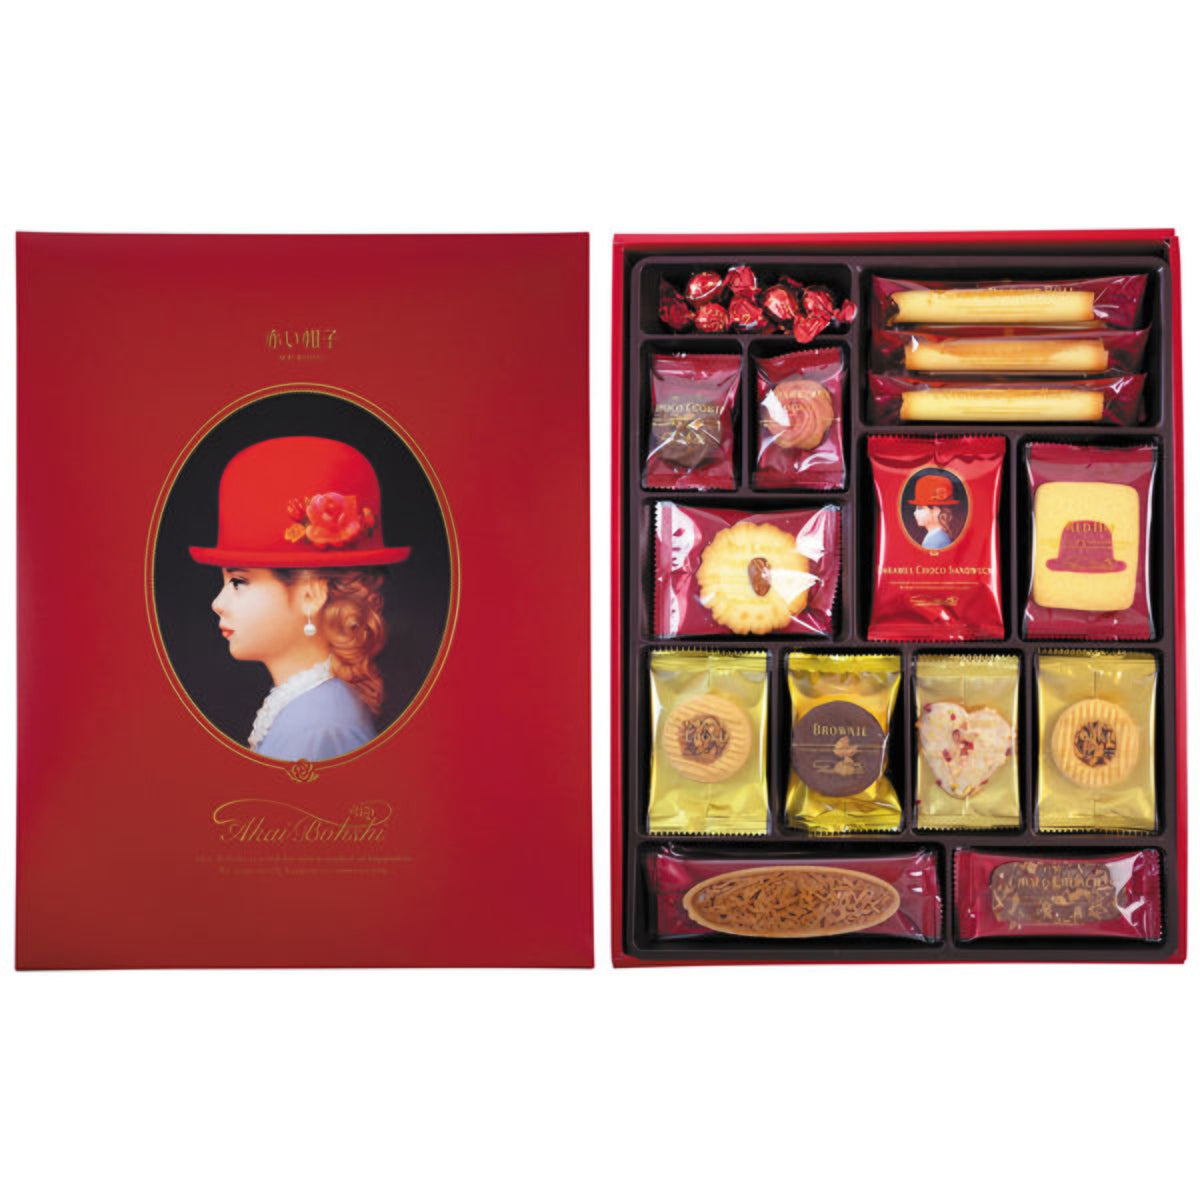 Akai Bohshi Red Box Assorted Cookies and Chocolates 45 Pieces – Japanese  Taste